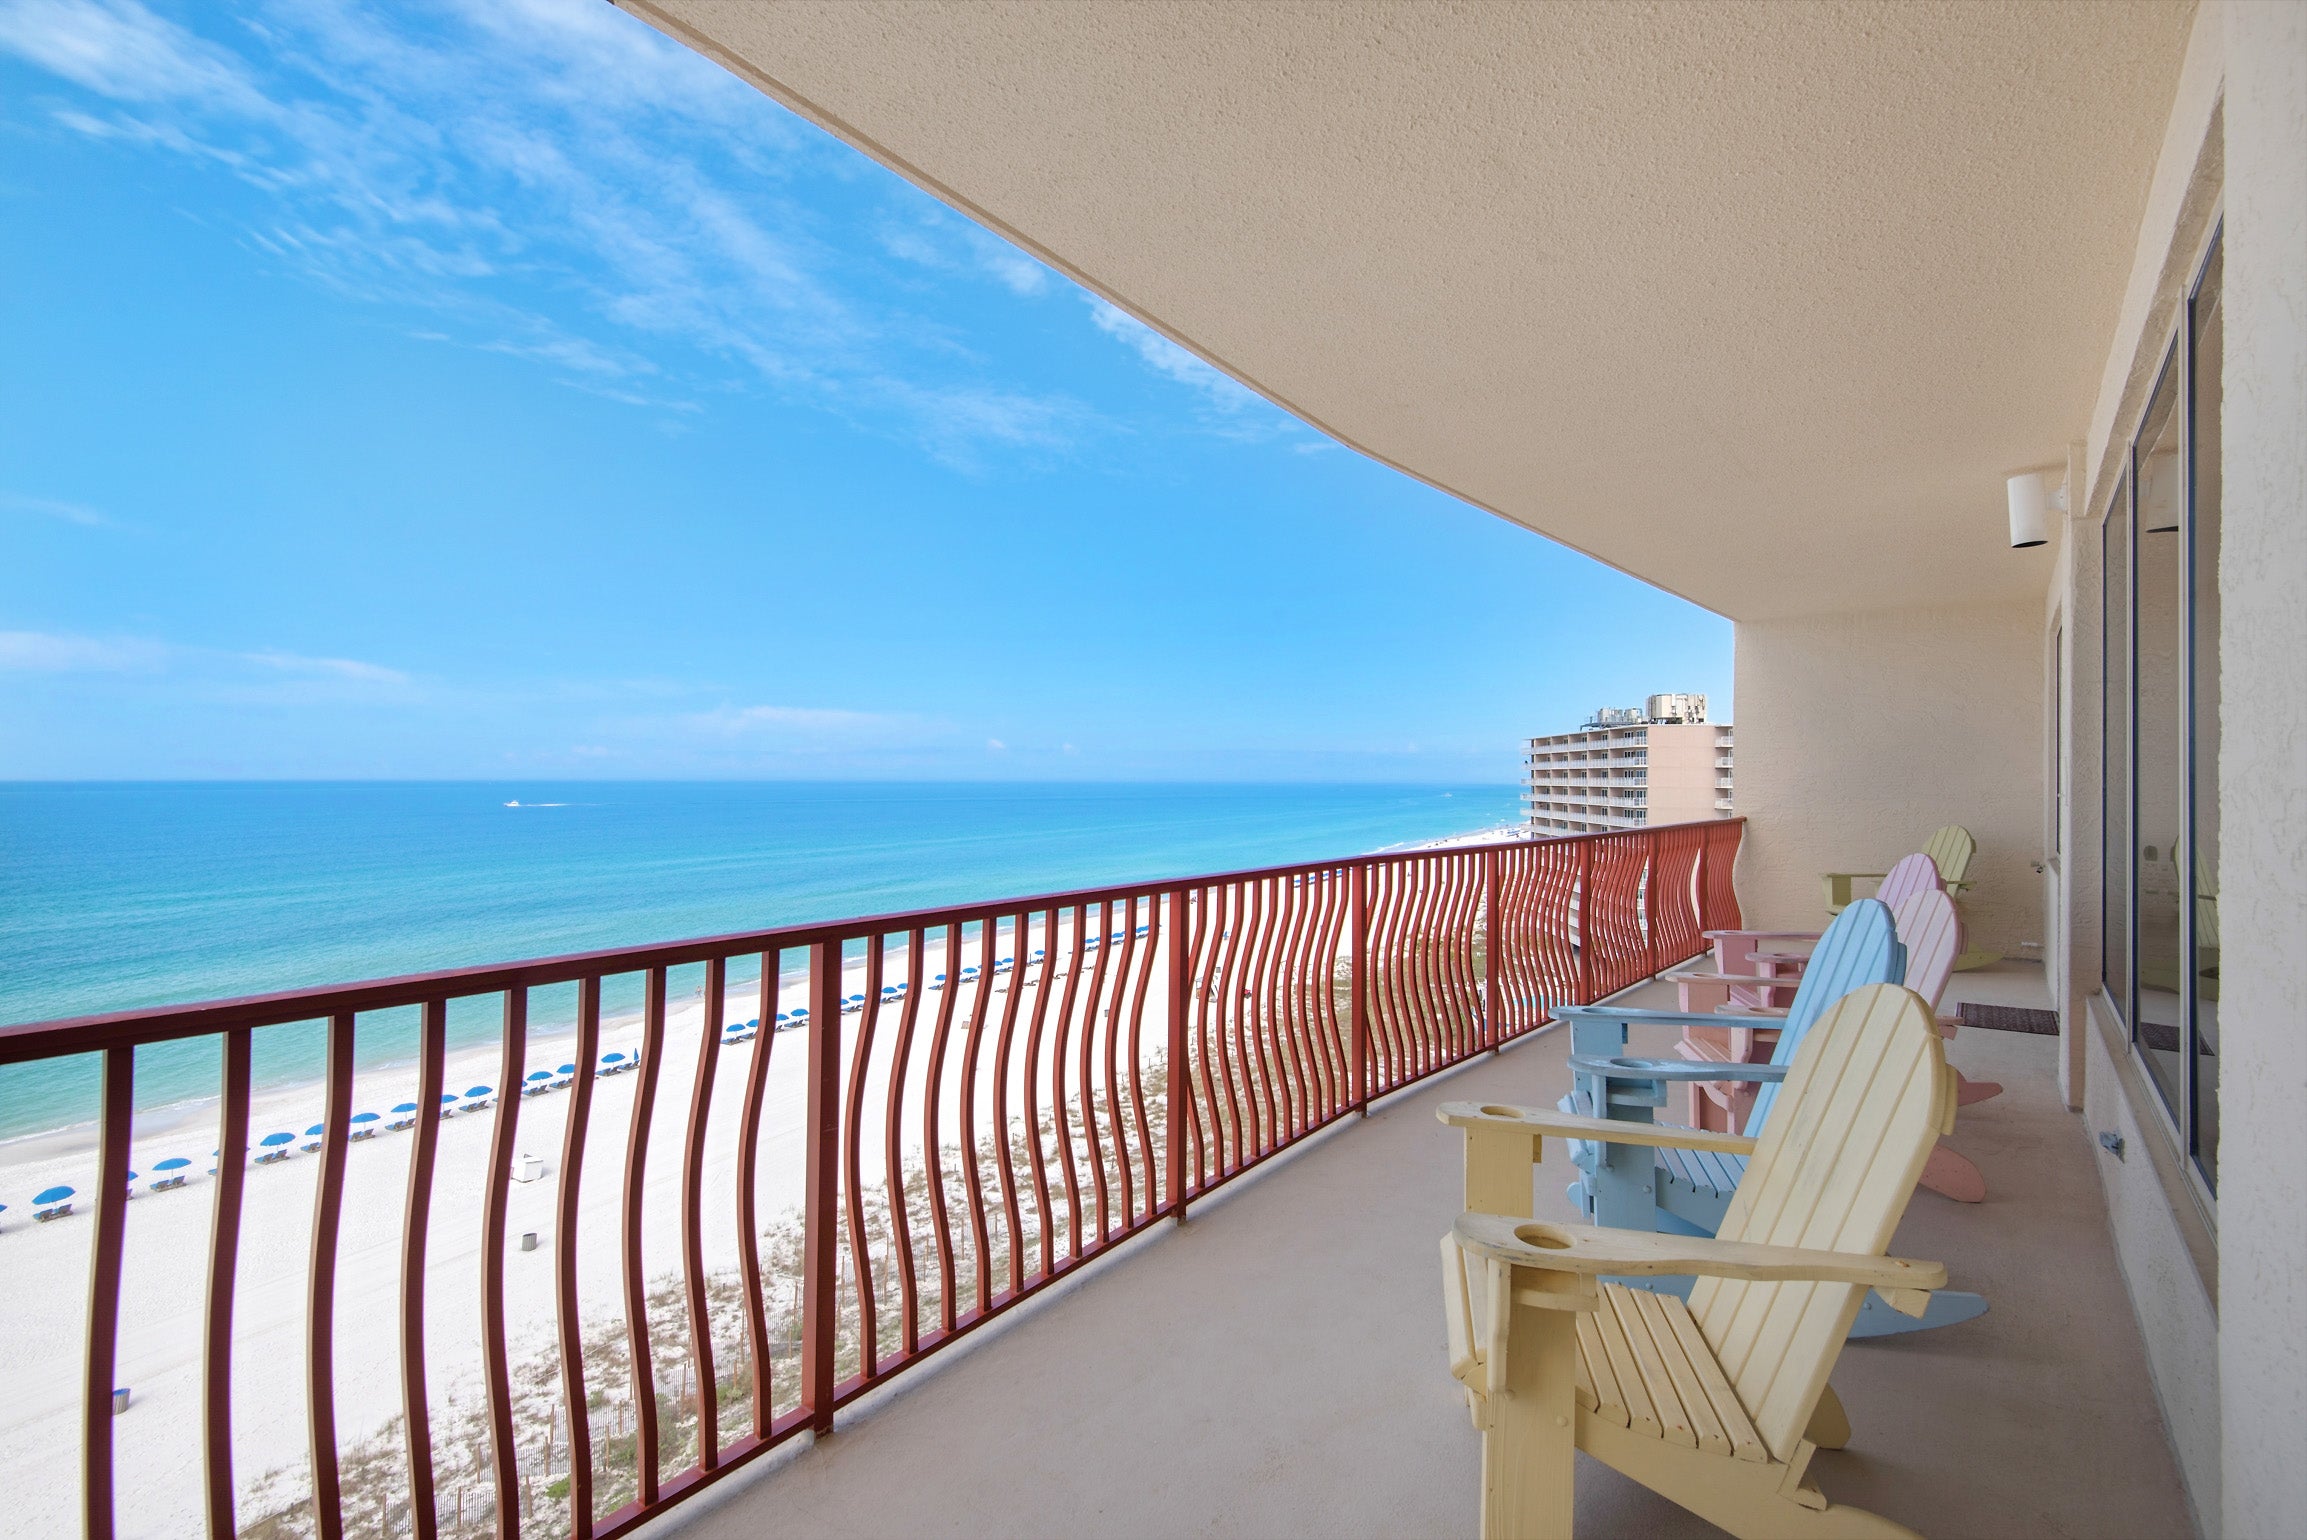 Stunning gulf views from the covered balcony